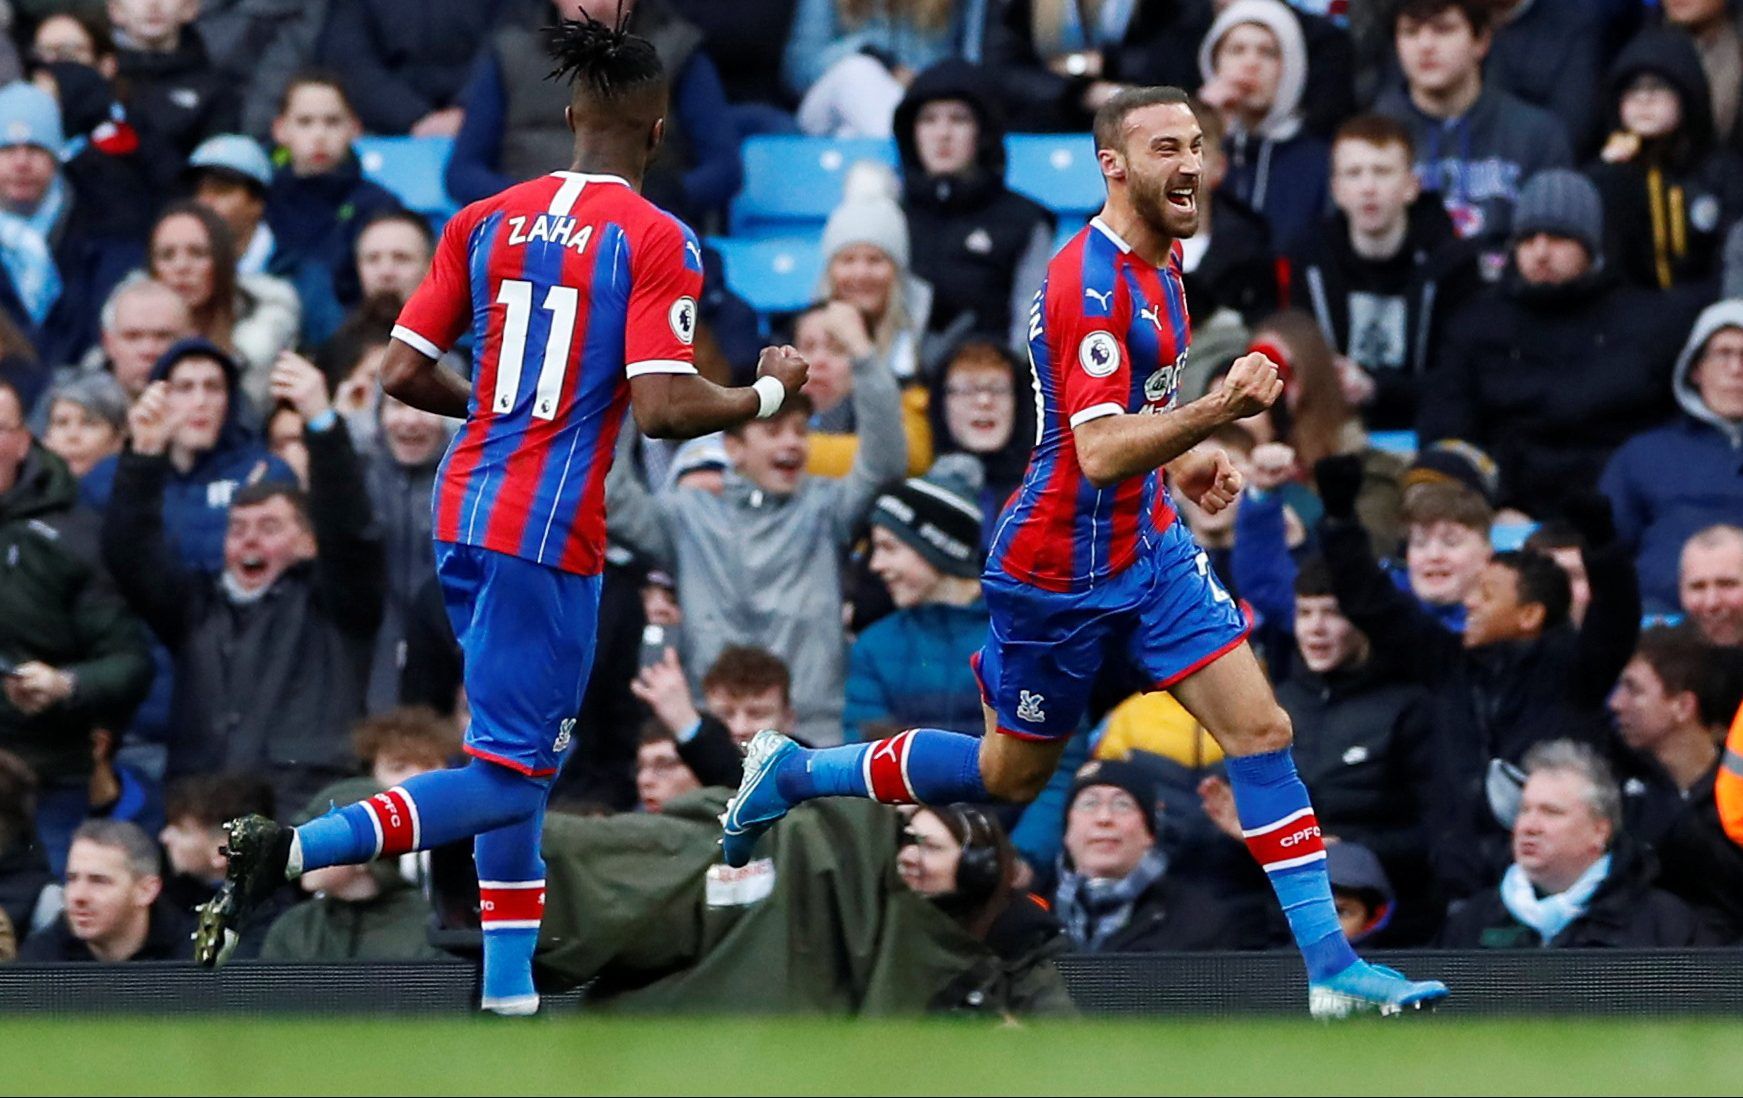 Soccer Football - Premier League - Manchester City v Crystal Palace - Etihad Stadium, Manchester, Britain - January 18, 2020  Crystal Palace's Cenk Tosun celebrates scoring their first goal          Action Images via Reuters/Jason Cairnduff  EDITORIAL USE ONLY. No use with unauthorized audio, video, data, fixture lists, club/league logos or 